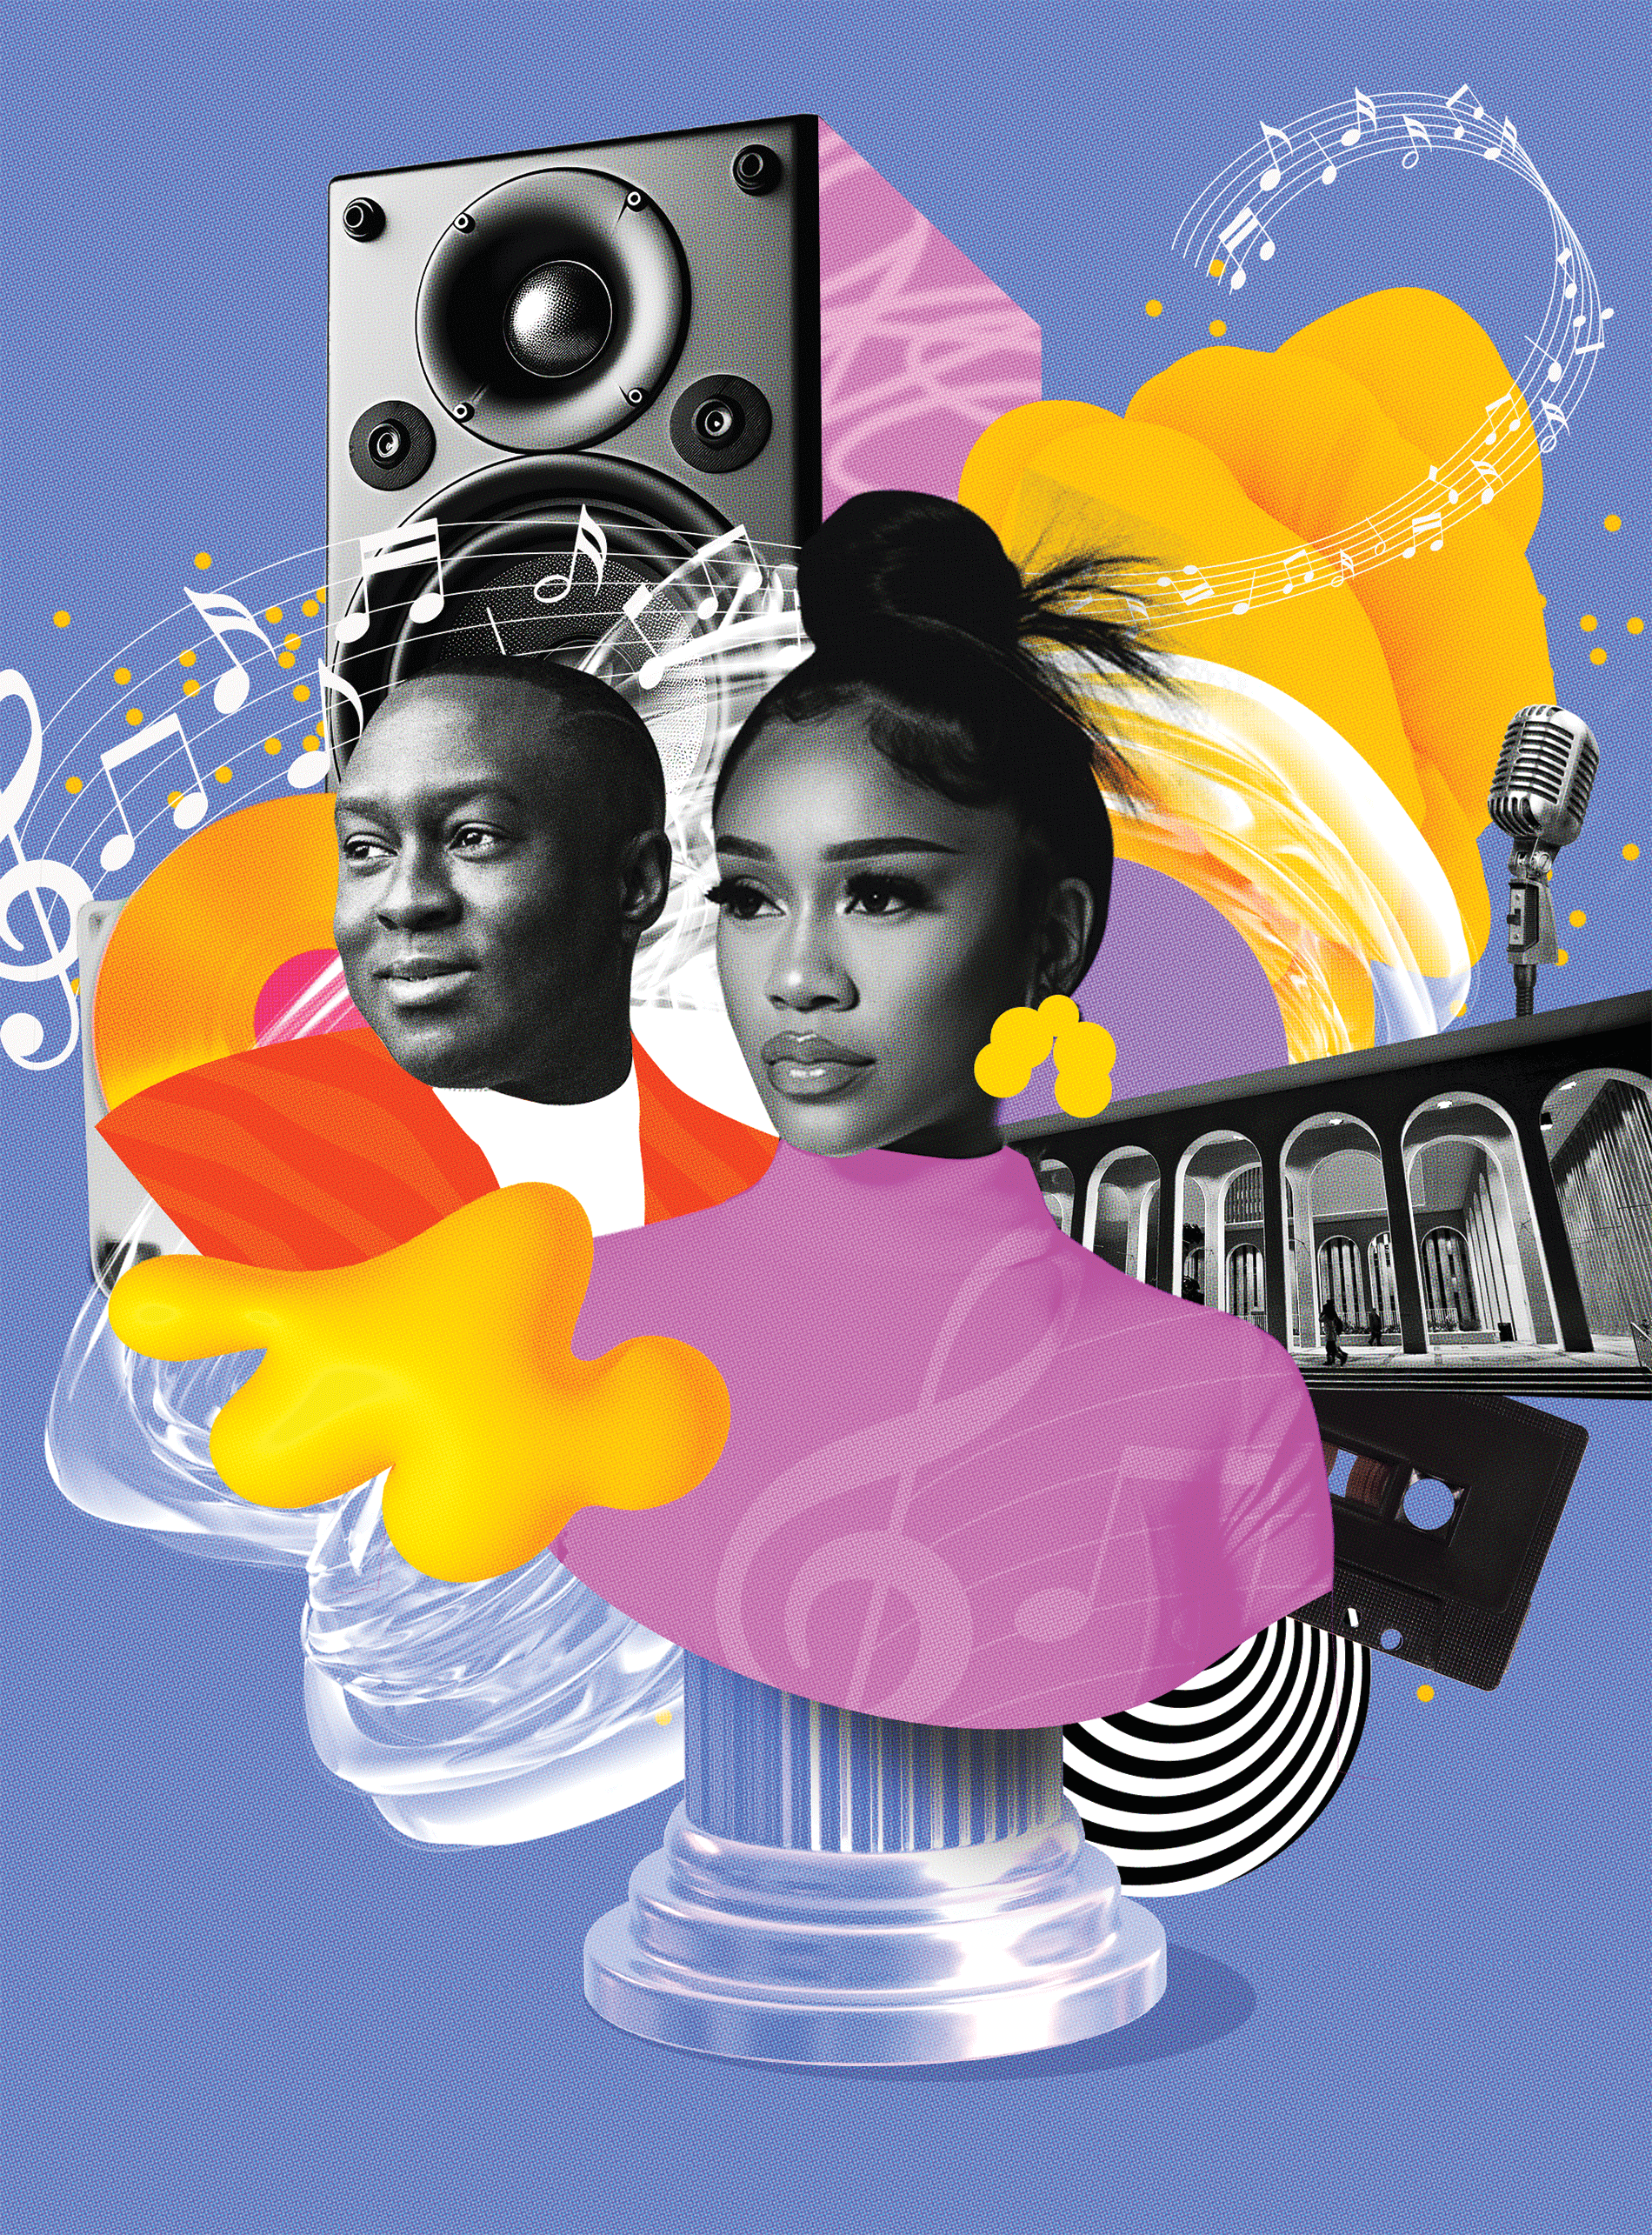 Illustration of Saweetie and Jason King surrounded by USC and musical instruments and tech in the backdrop over a lavender background.